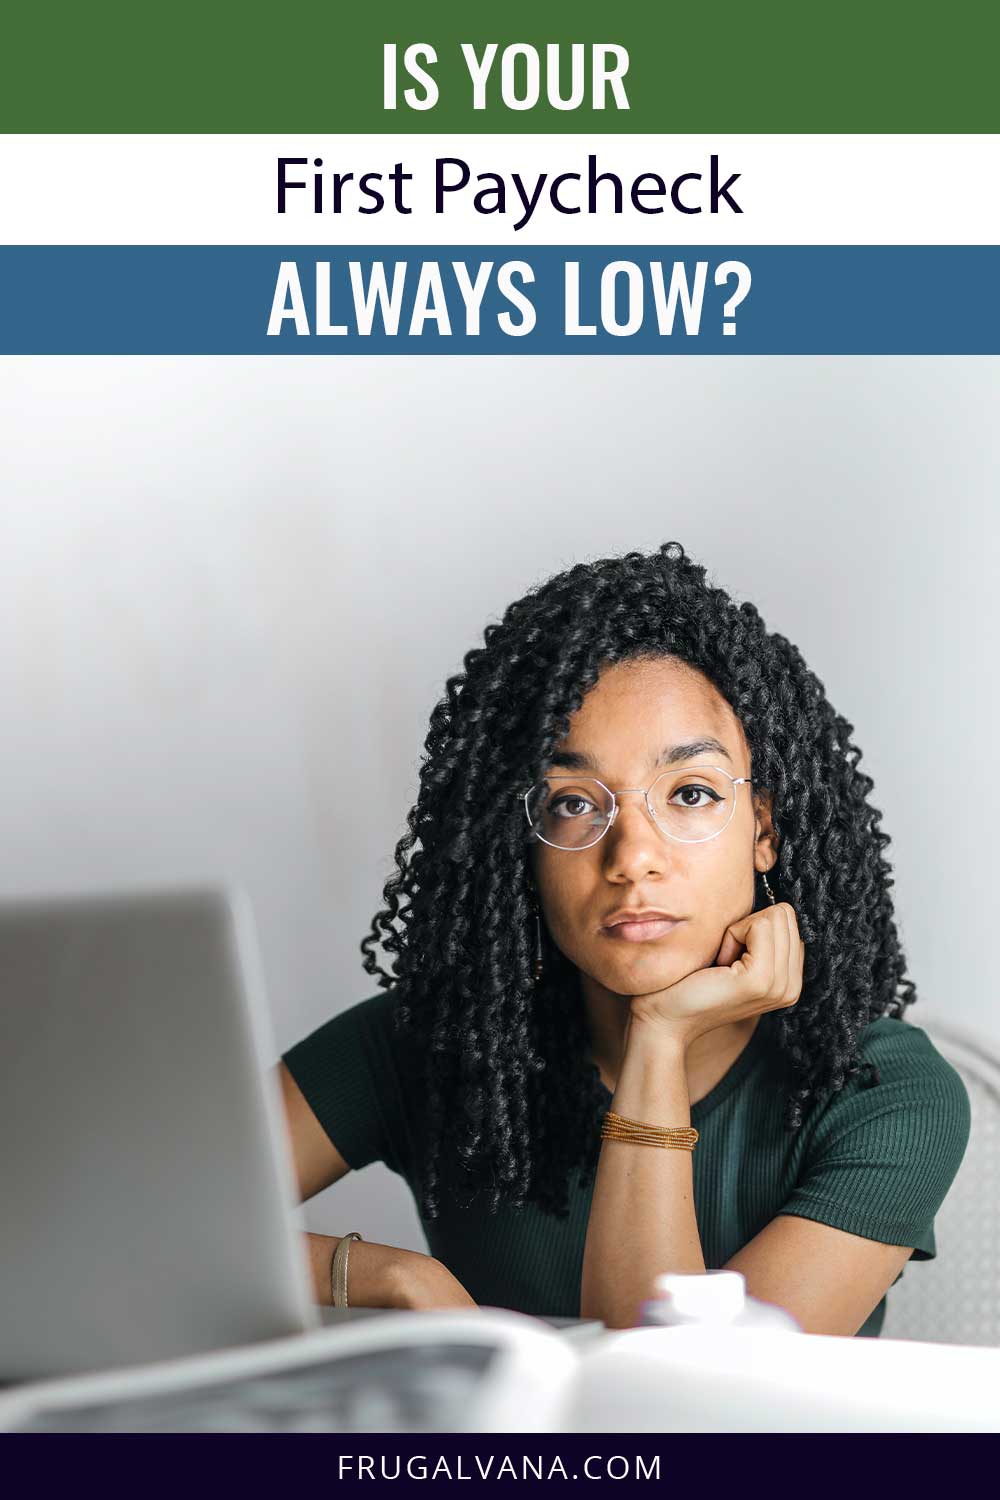 Is Your First Paycheck Always Low?